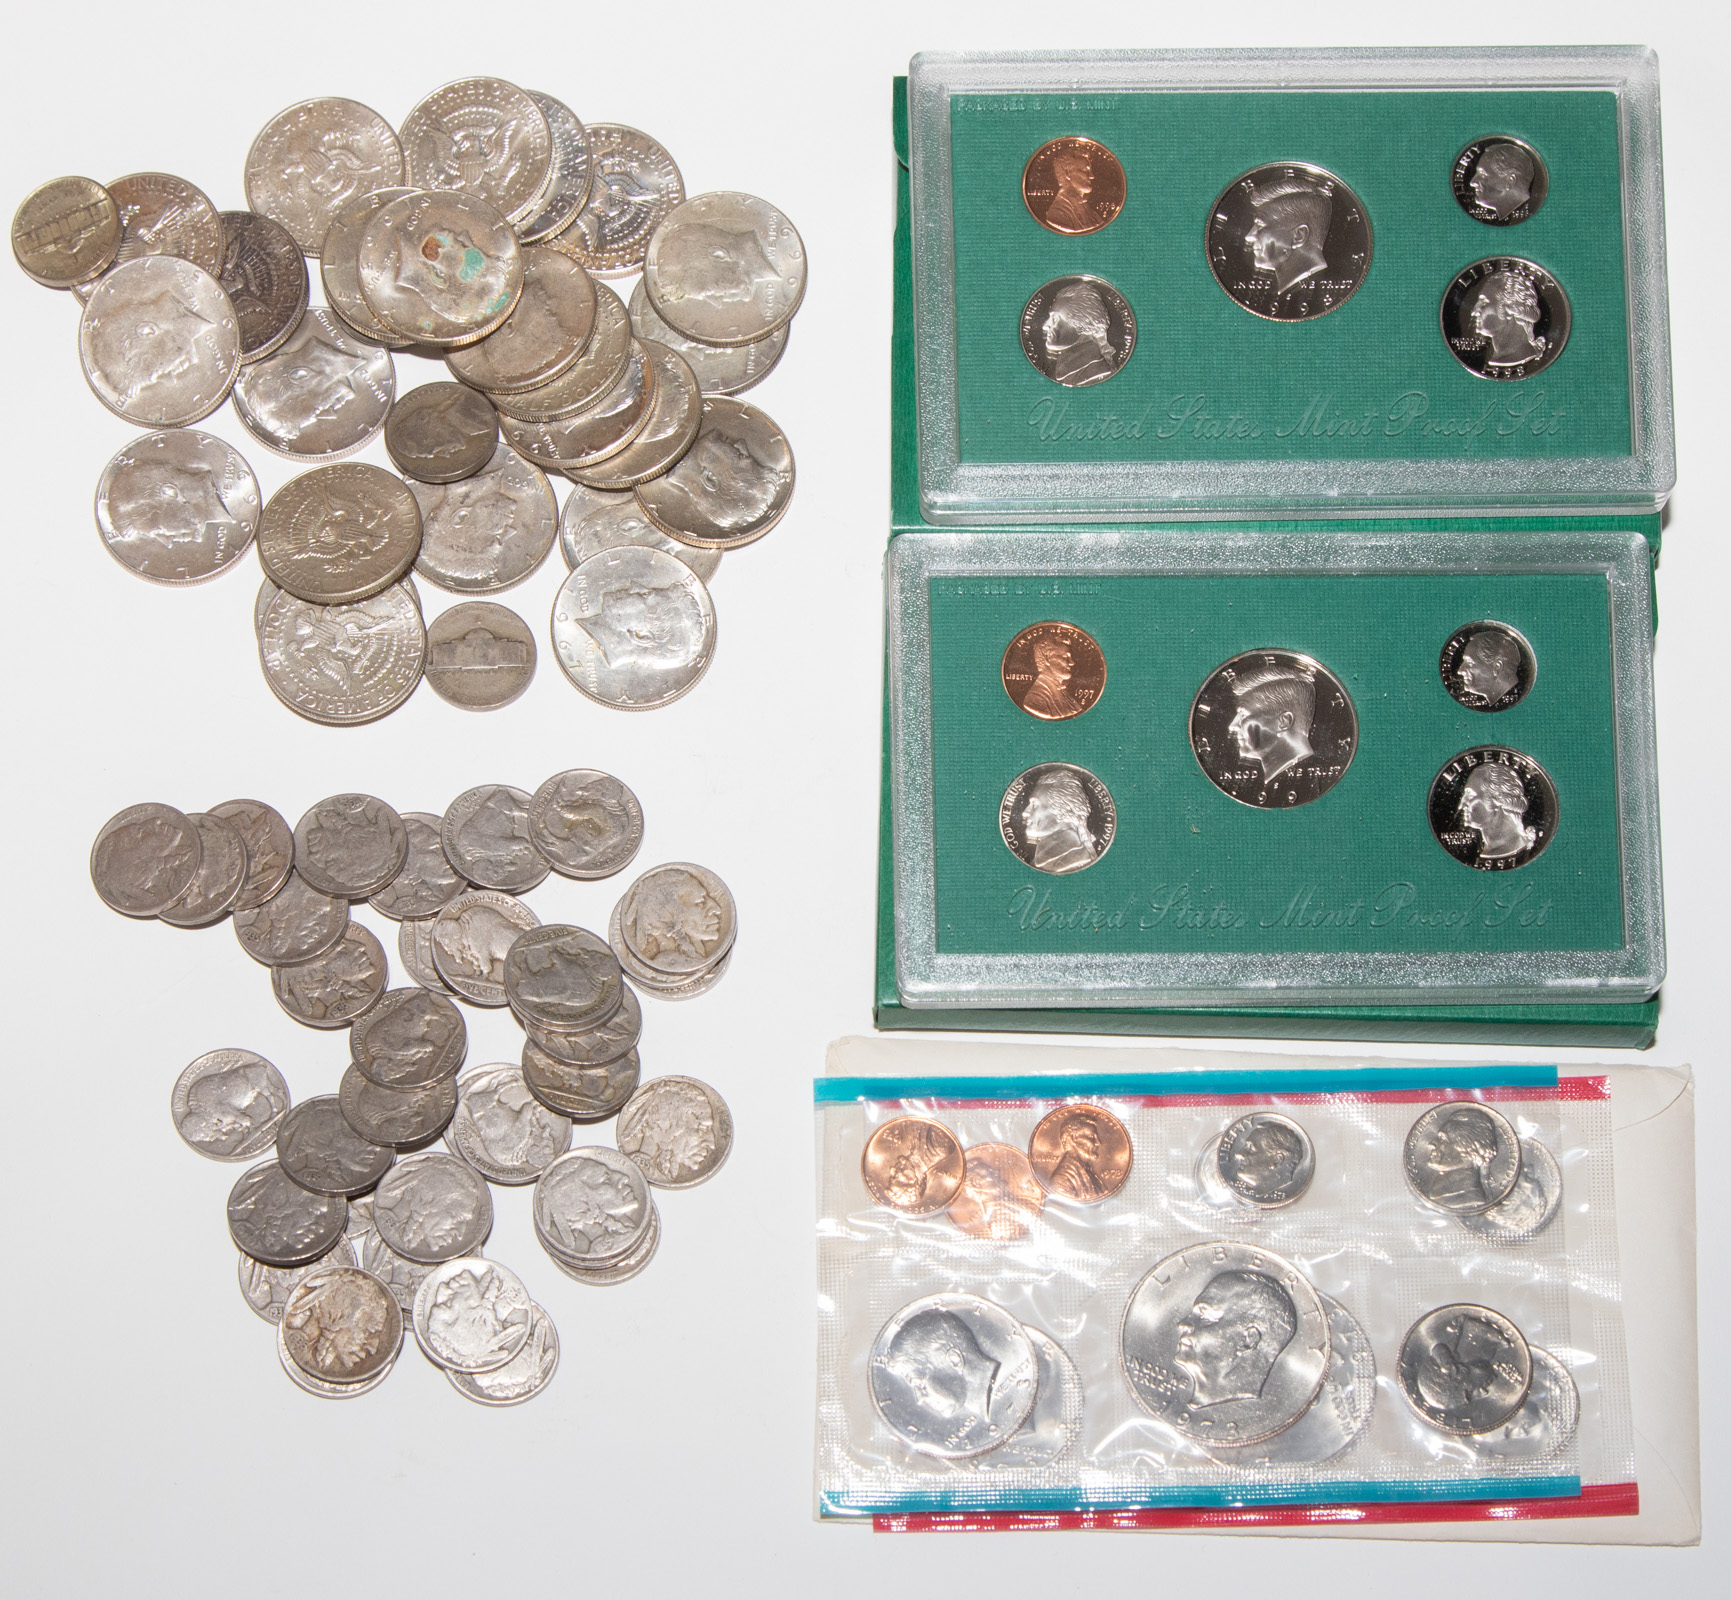 NICE LITTLE COIN COLLECTION 5 silver